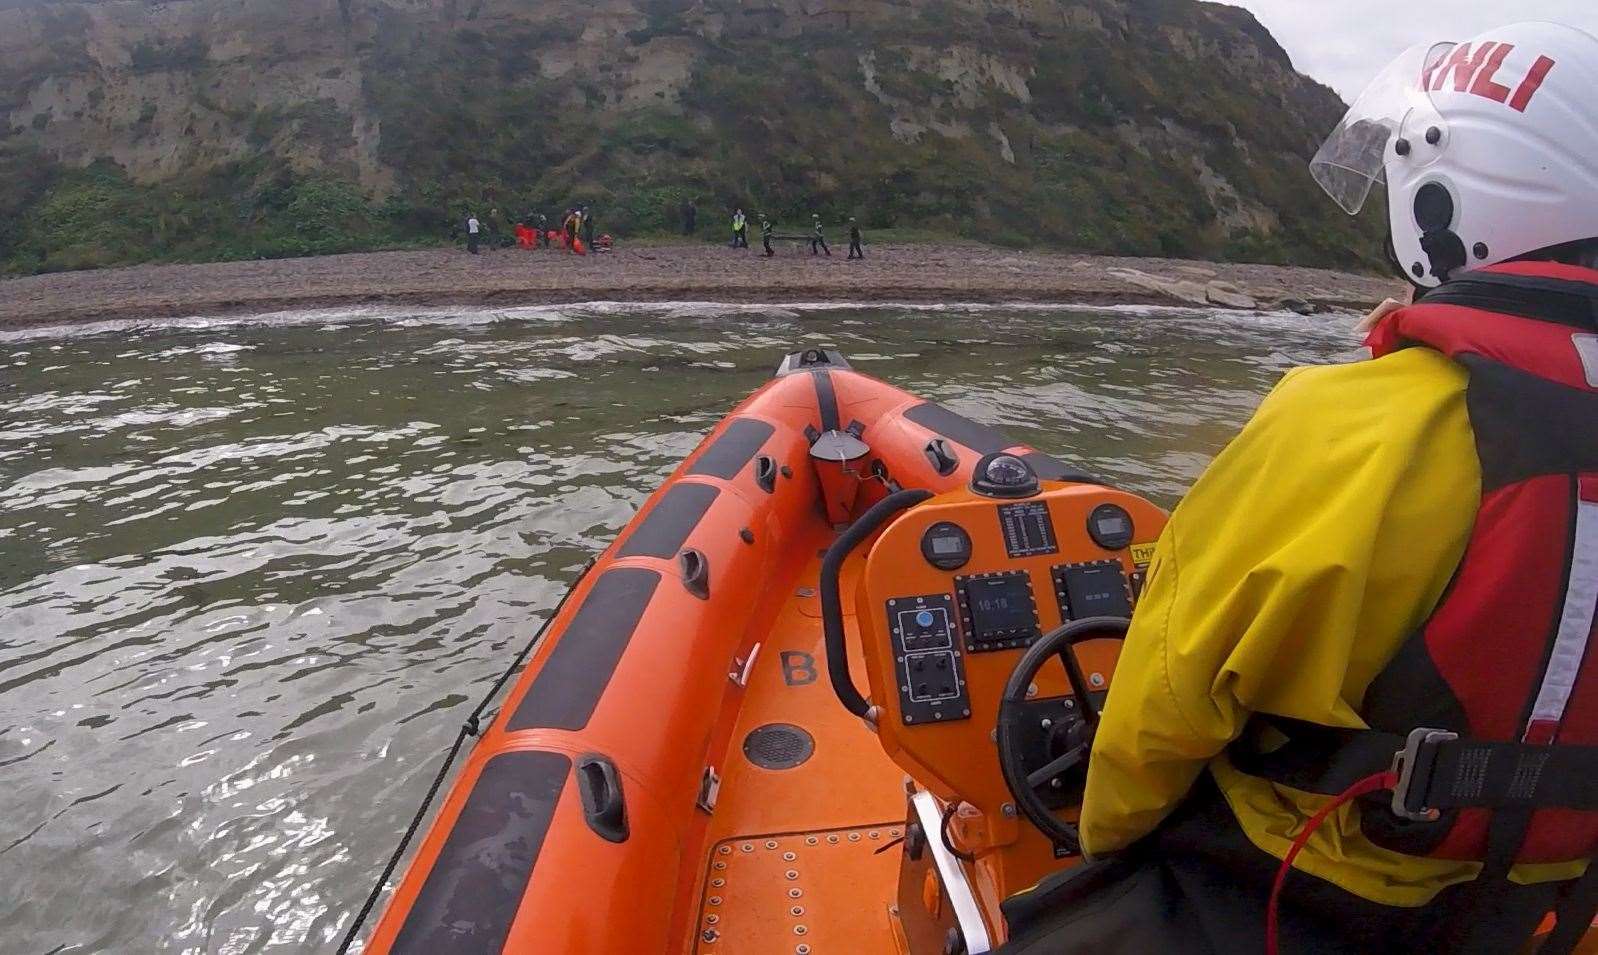 The Whitstable lifeboat heading for the cliffs at Bishopstone to aid the casualty. Picture: RNLI Whitstable.